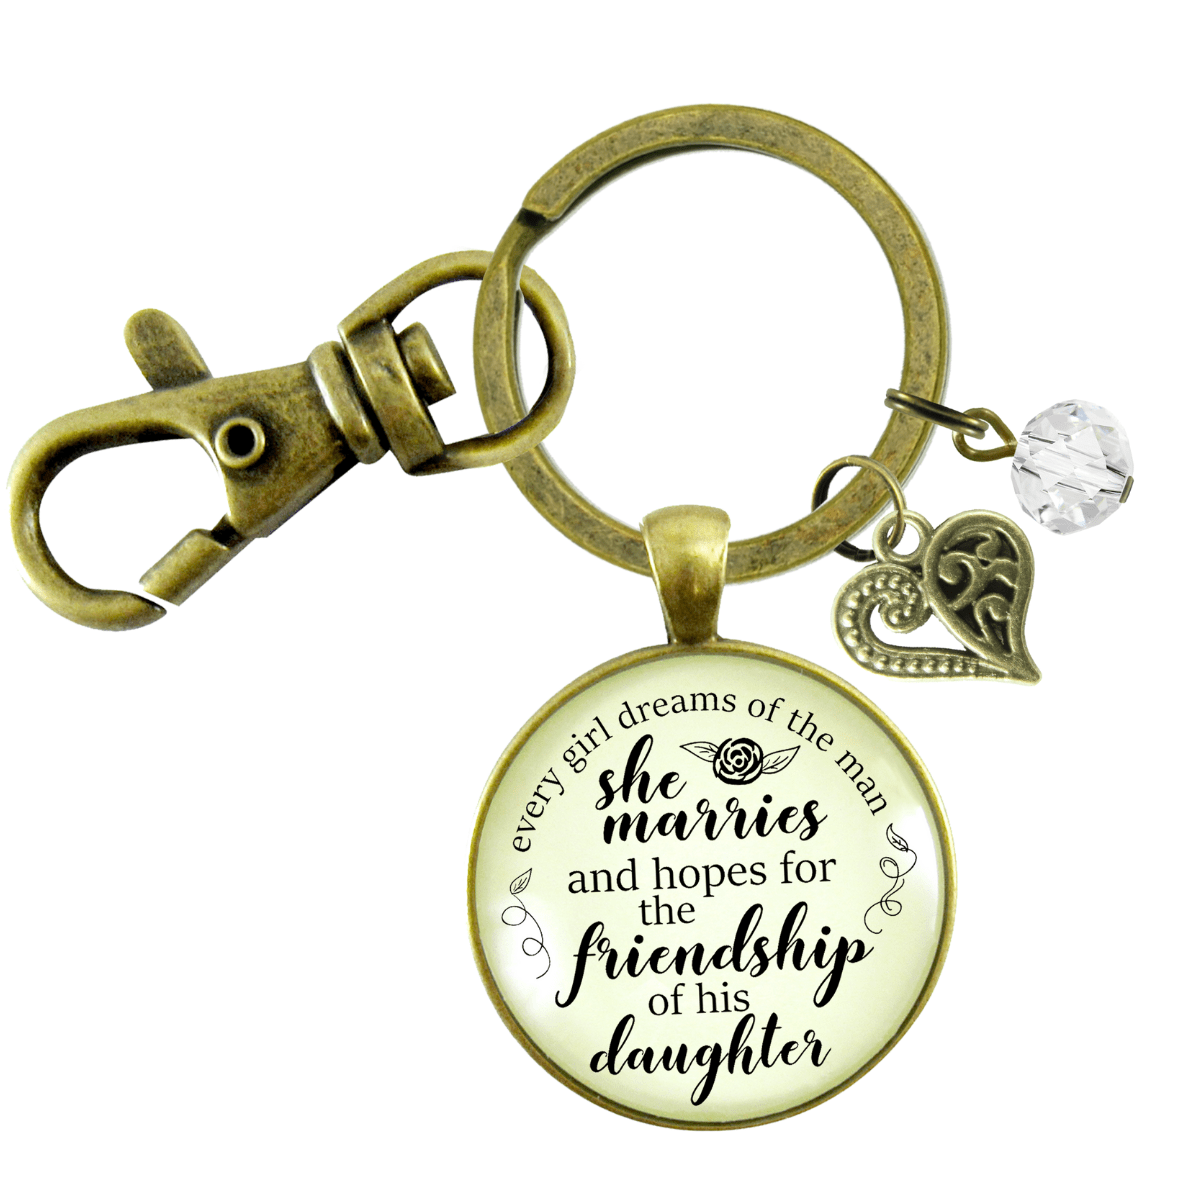 To Stepdaughter Keychain Dream of Friendship From Bonus Step Mother Wedding Day Gift - Gutsy Goodness Handmade Jewelry;To Stepdaughter Keychain Dream Of Friendship From Bonus Step Mother Wedding Day Gift - Gutsy Goodness Handmade Jewelry Gifts